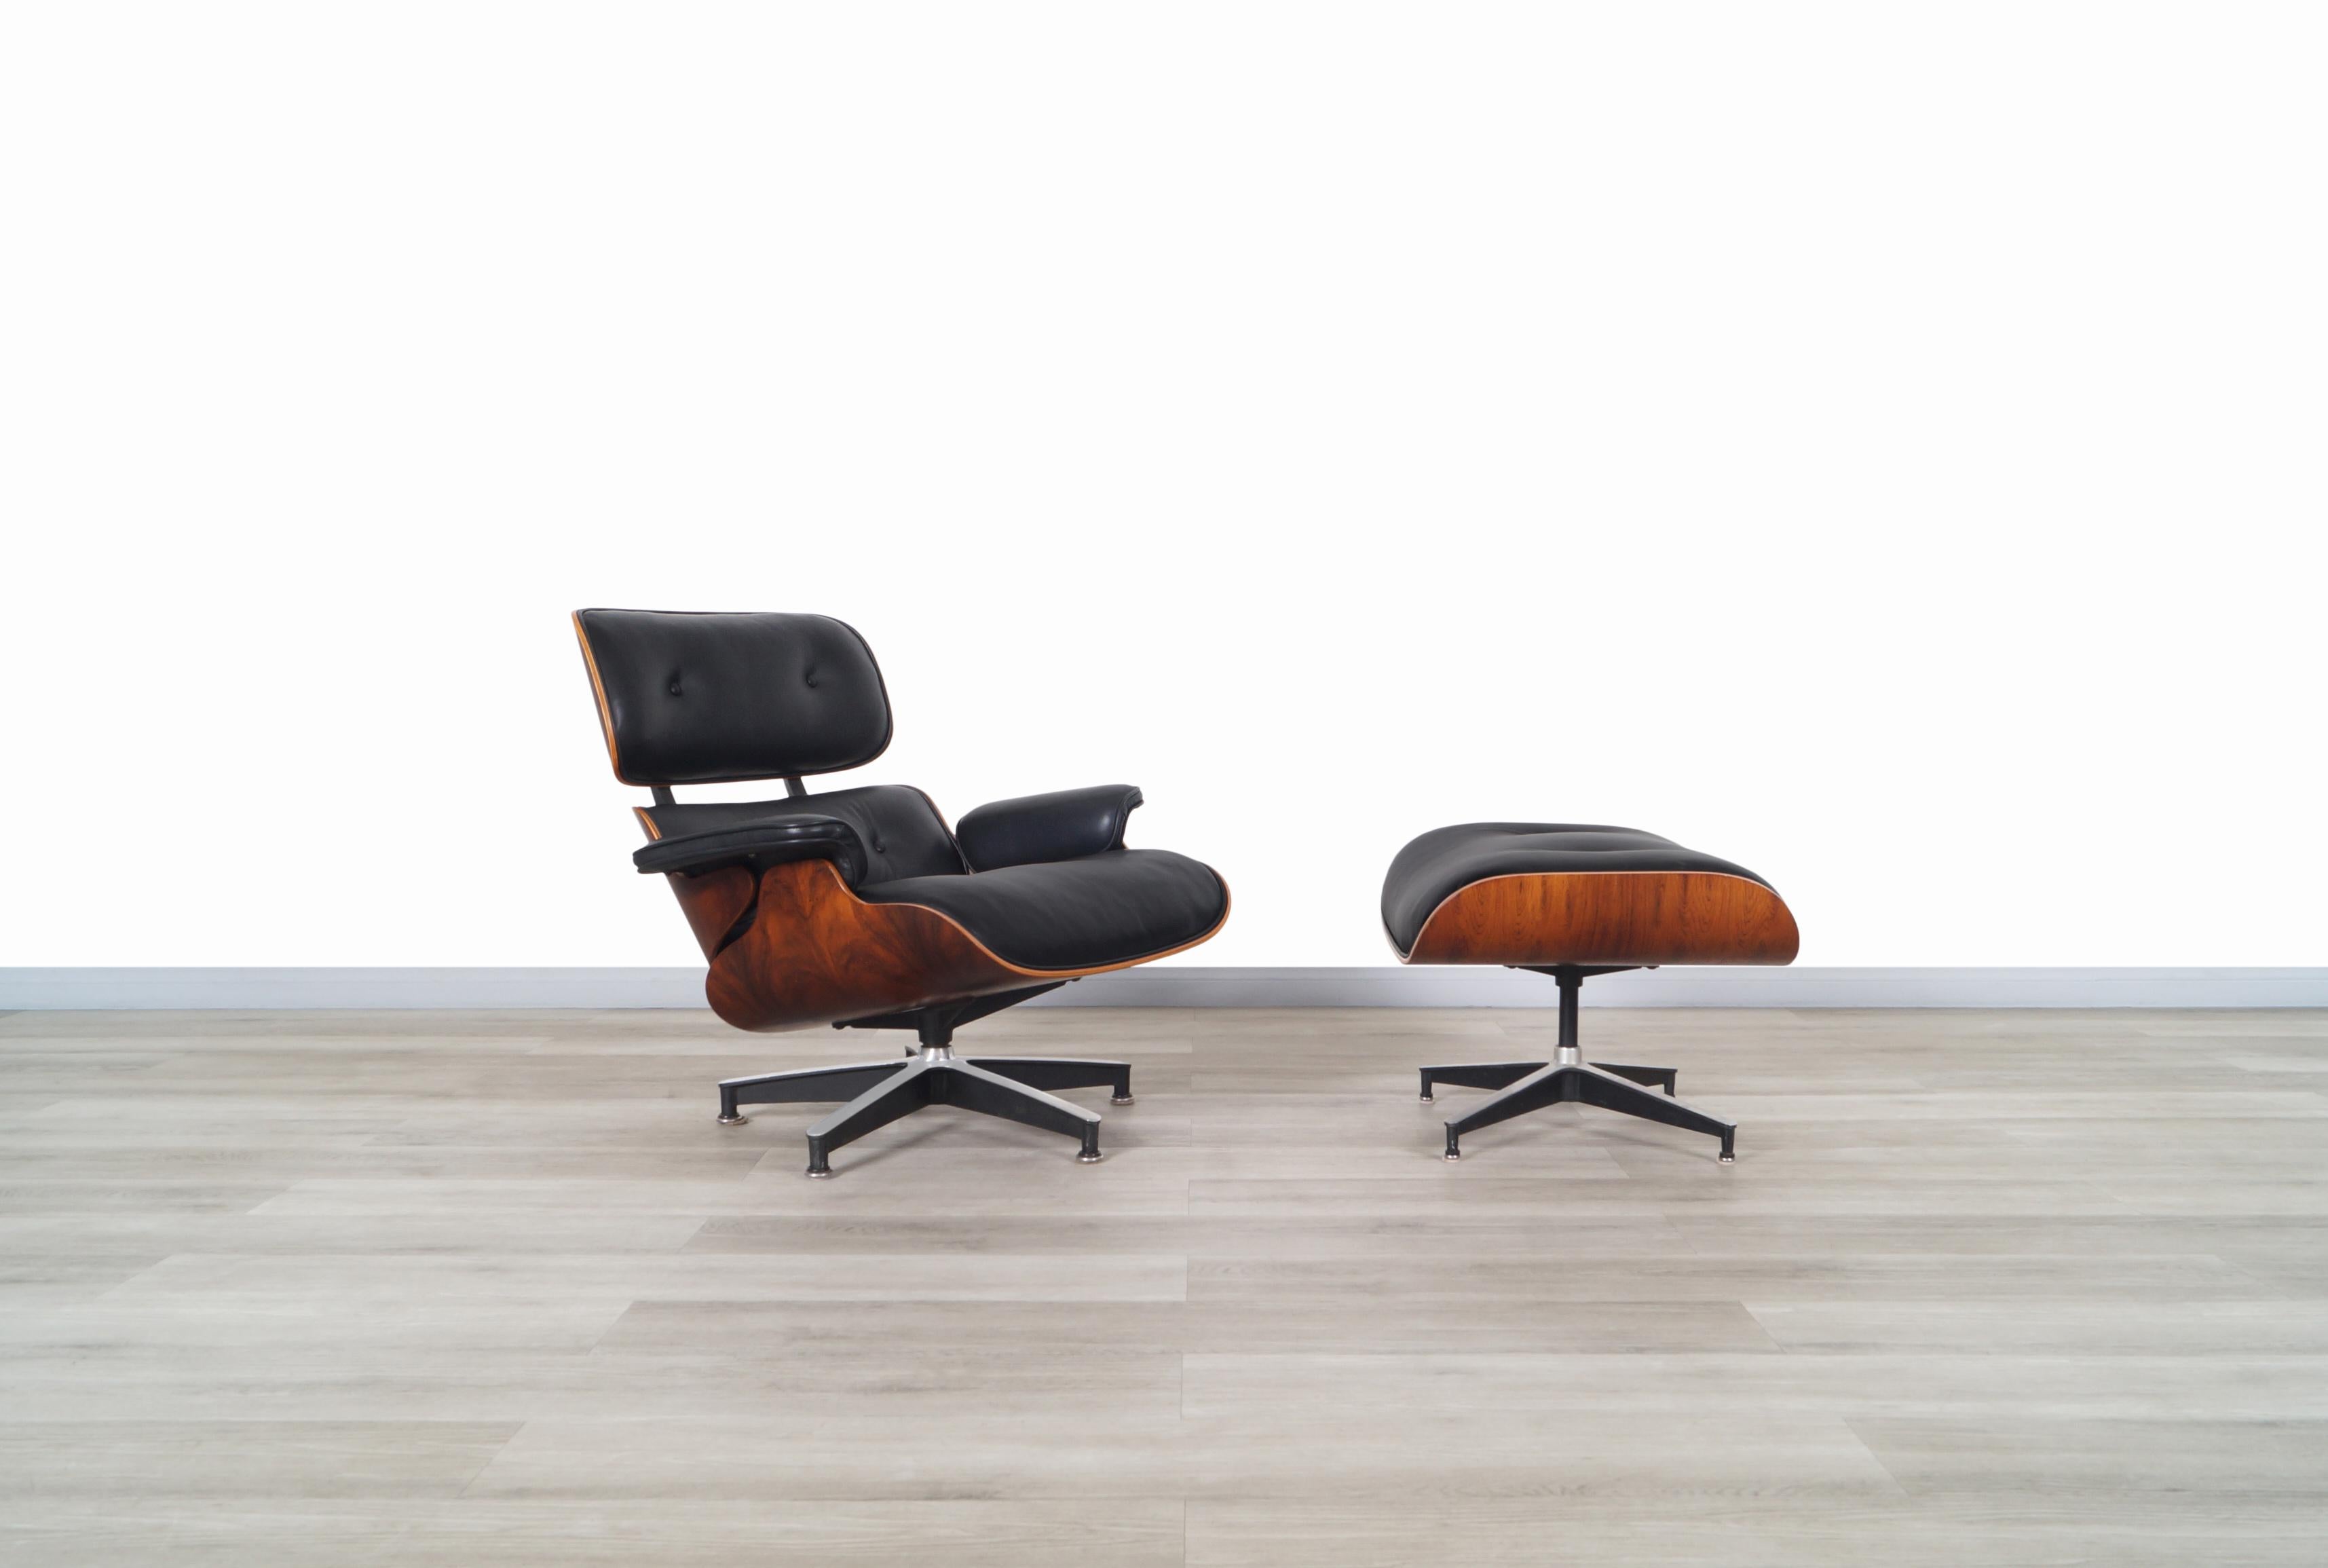 Stunning vintage rosewood lounge chair and ottoman 670/671 designed by Charles and Ray Eames for Herman Miller in the United States, circa 1970s. Both the lounge chair and the ottoman have a Brazilian rosewood frame where the fine grains of the wood